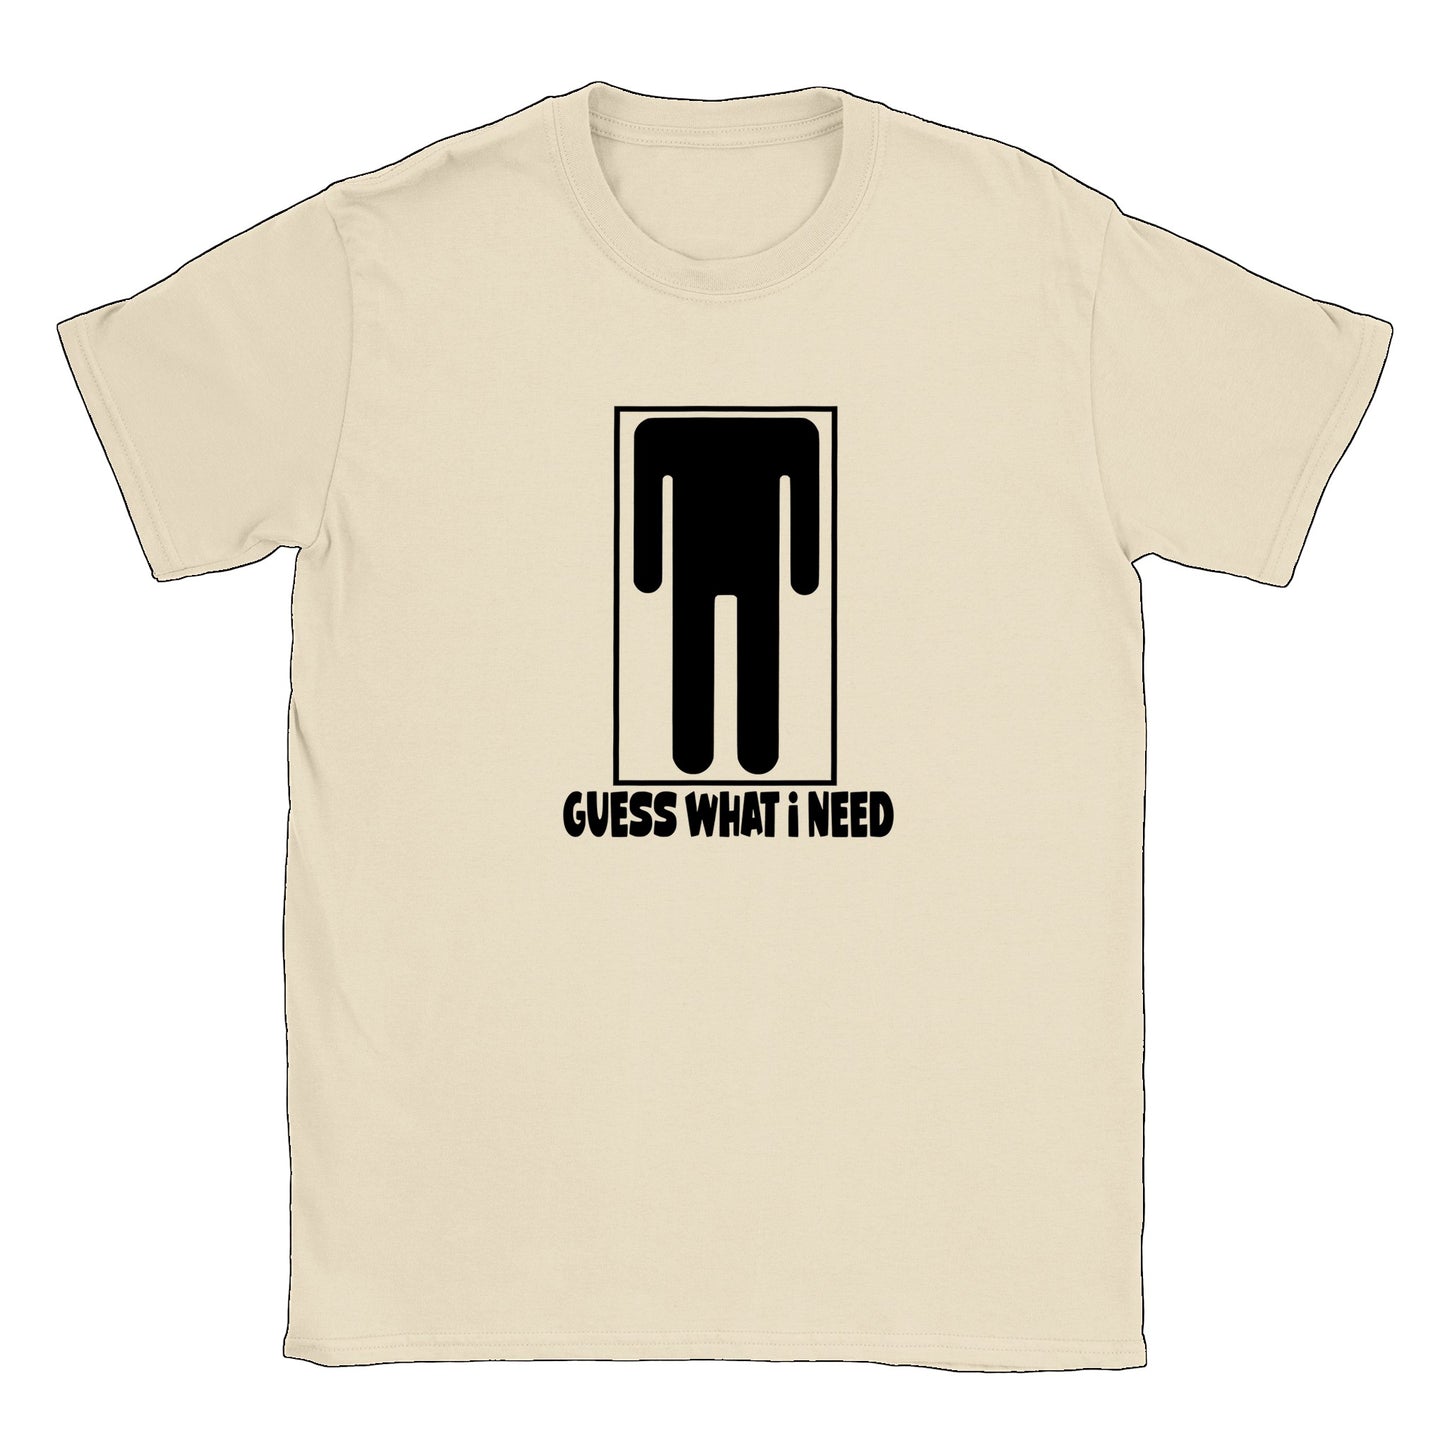 Guess What I Need T-shirt - Mister Snarky's